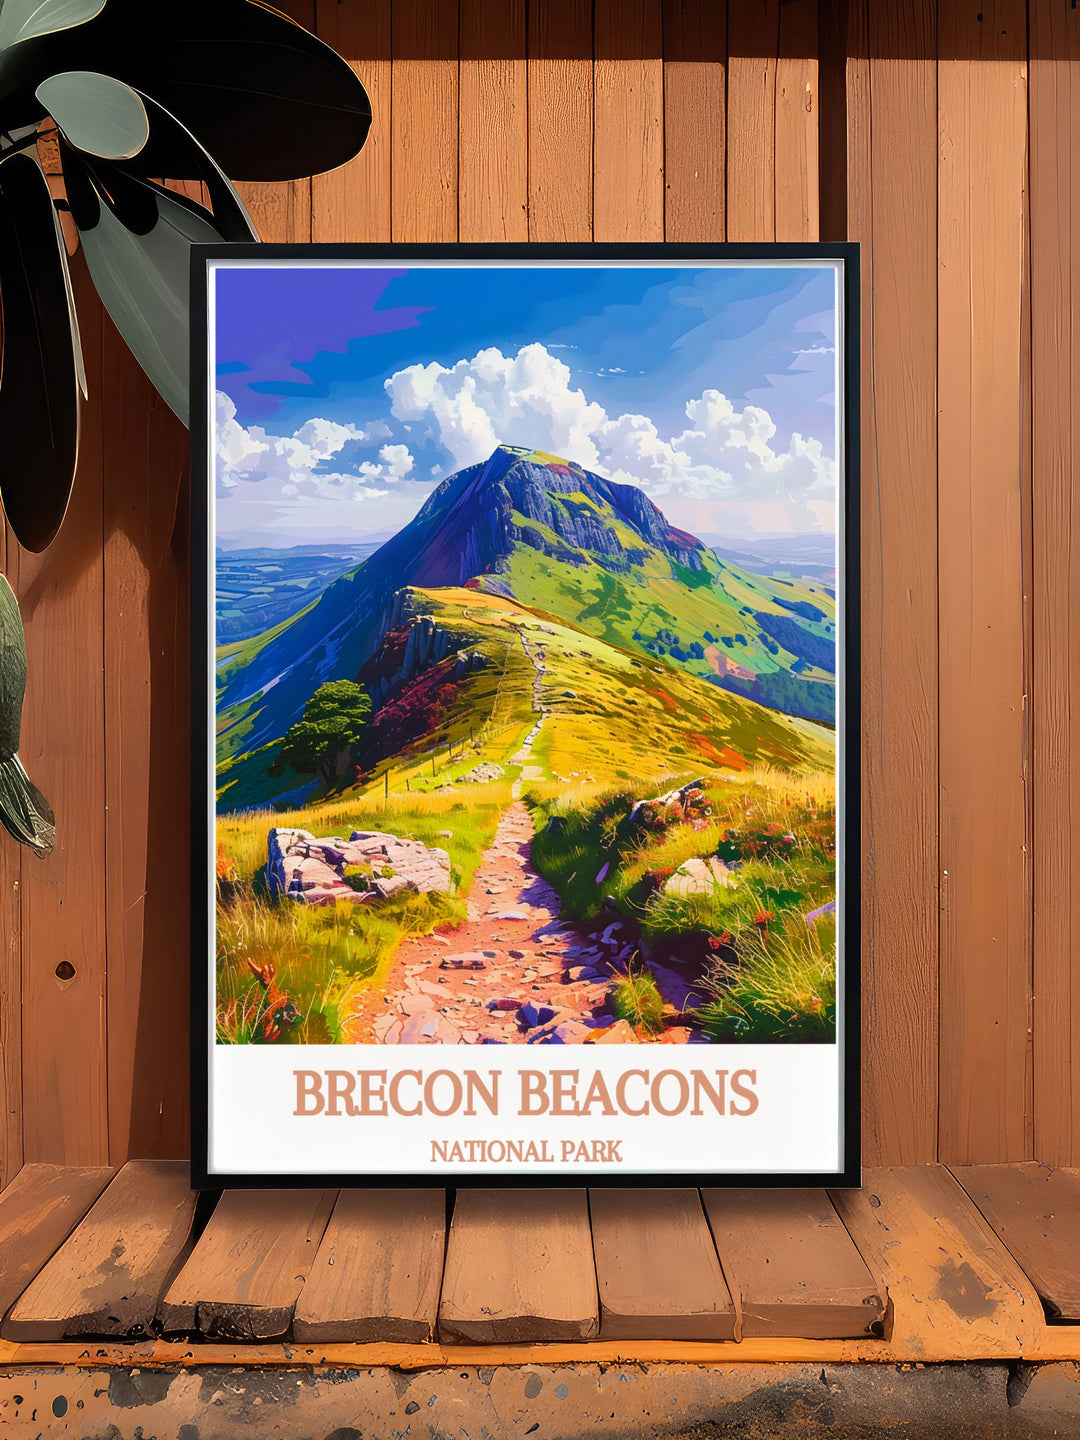 Custom print of Pen Y Fan, allowing you to personalize the artwork to match your style and preferences. This print captures the natural beauty of the Brecon Beacons, offering a unique and meaningful way to celebrate your connection to South Wales.